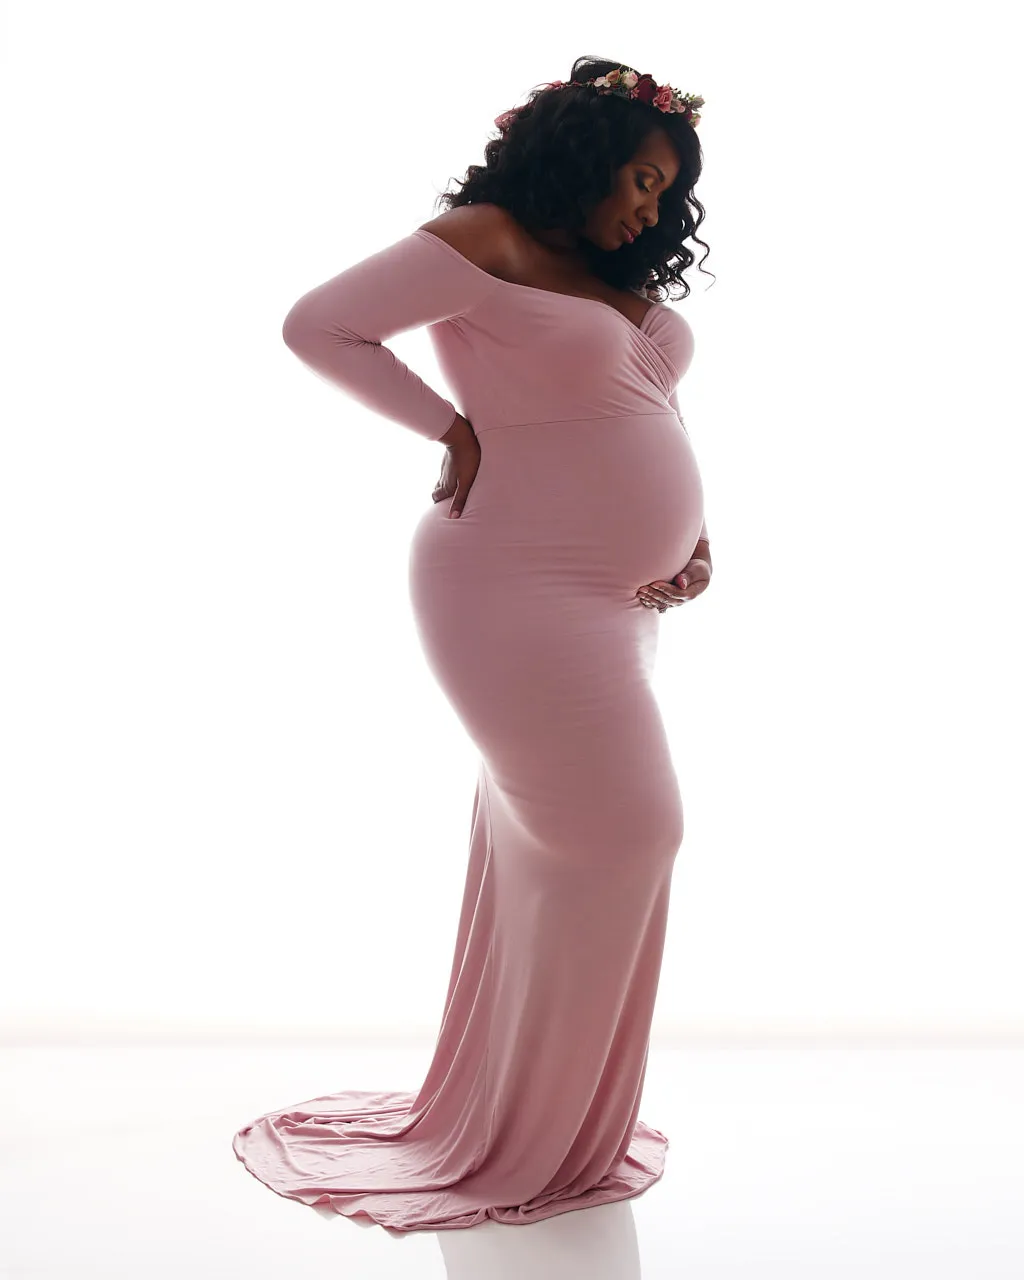 maternity photos studio | pregnant woman of color silhouetted on white background cradling her belly | maternity studio photo shoot | Washington DC